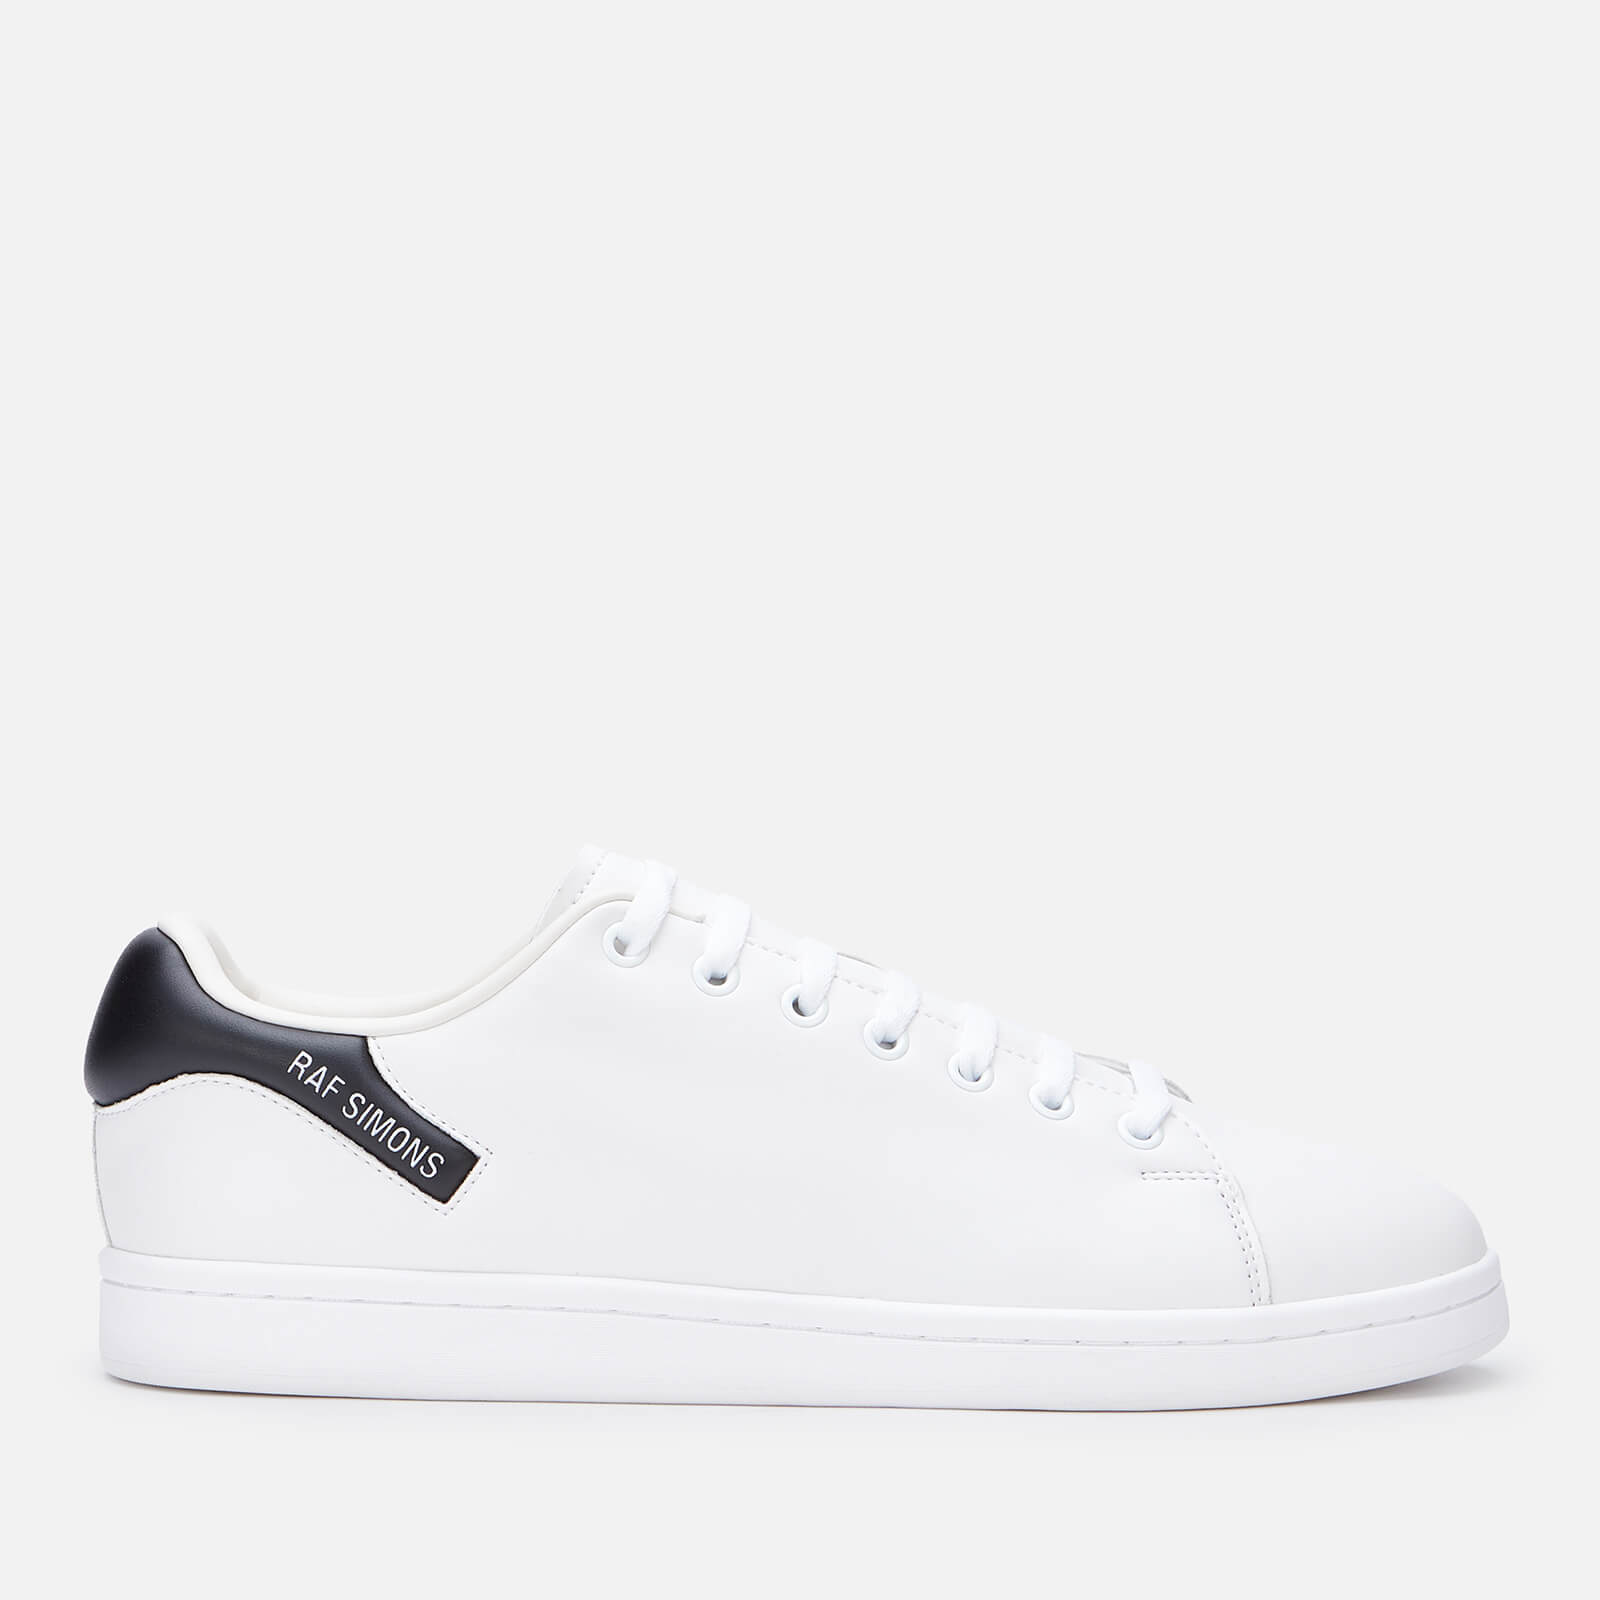 Raf Simons Men's Orion Leather Cupsole Trainers - White/Black - UK 7